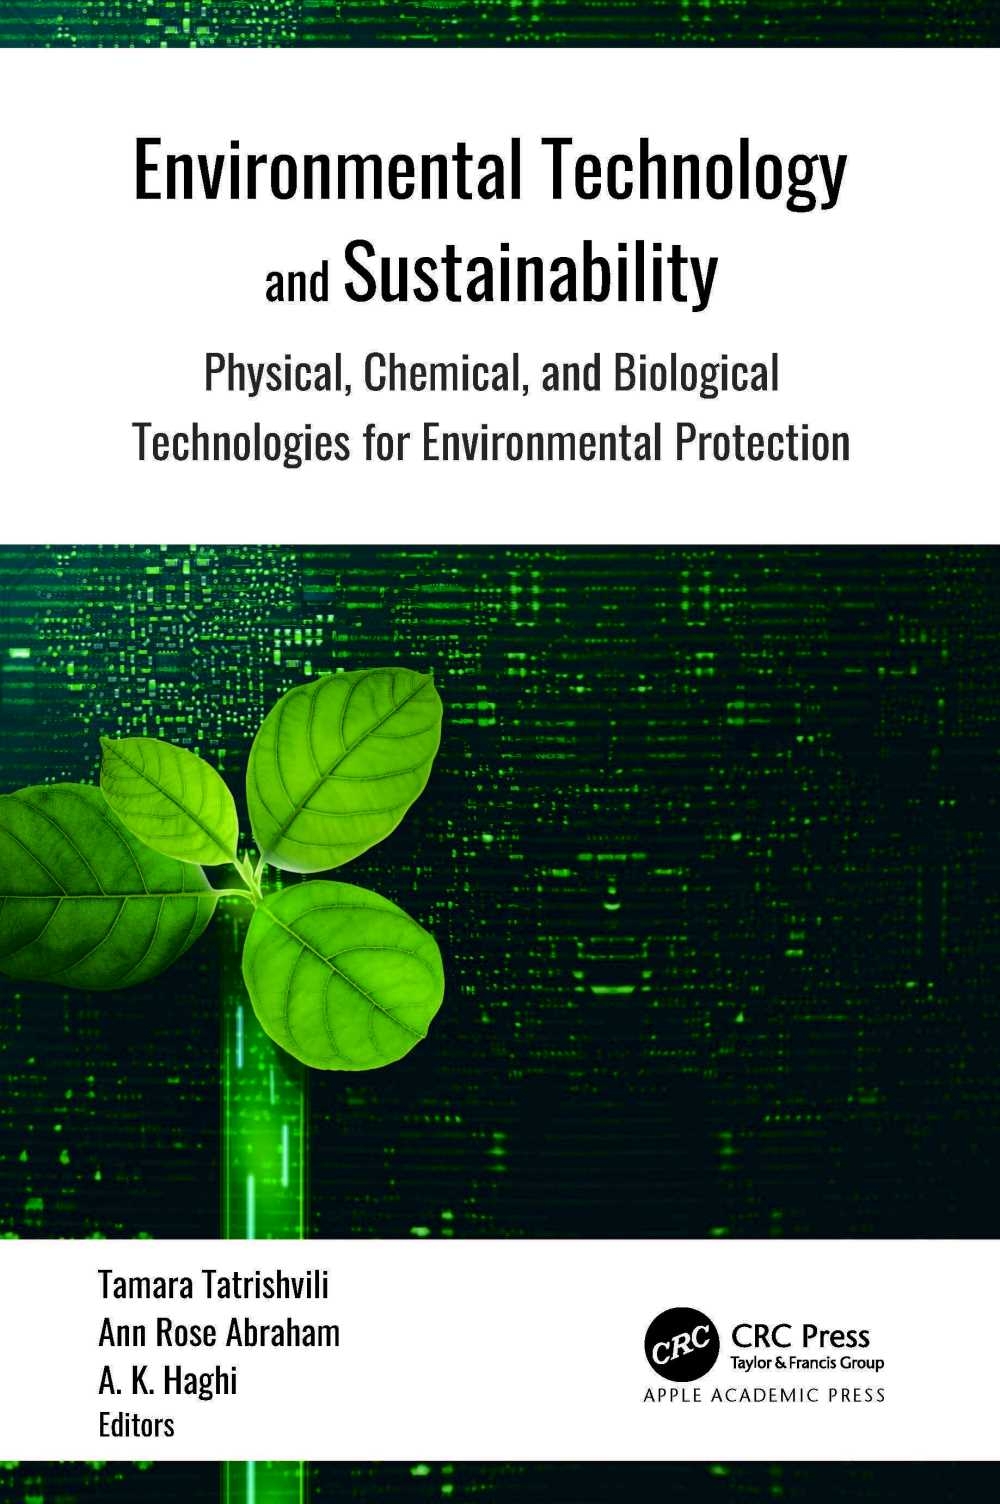 Environmental Technology and Sustainability: Physical, Chemical and Biological Technologies for Environmental Protection